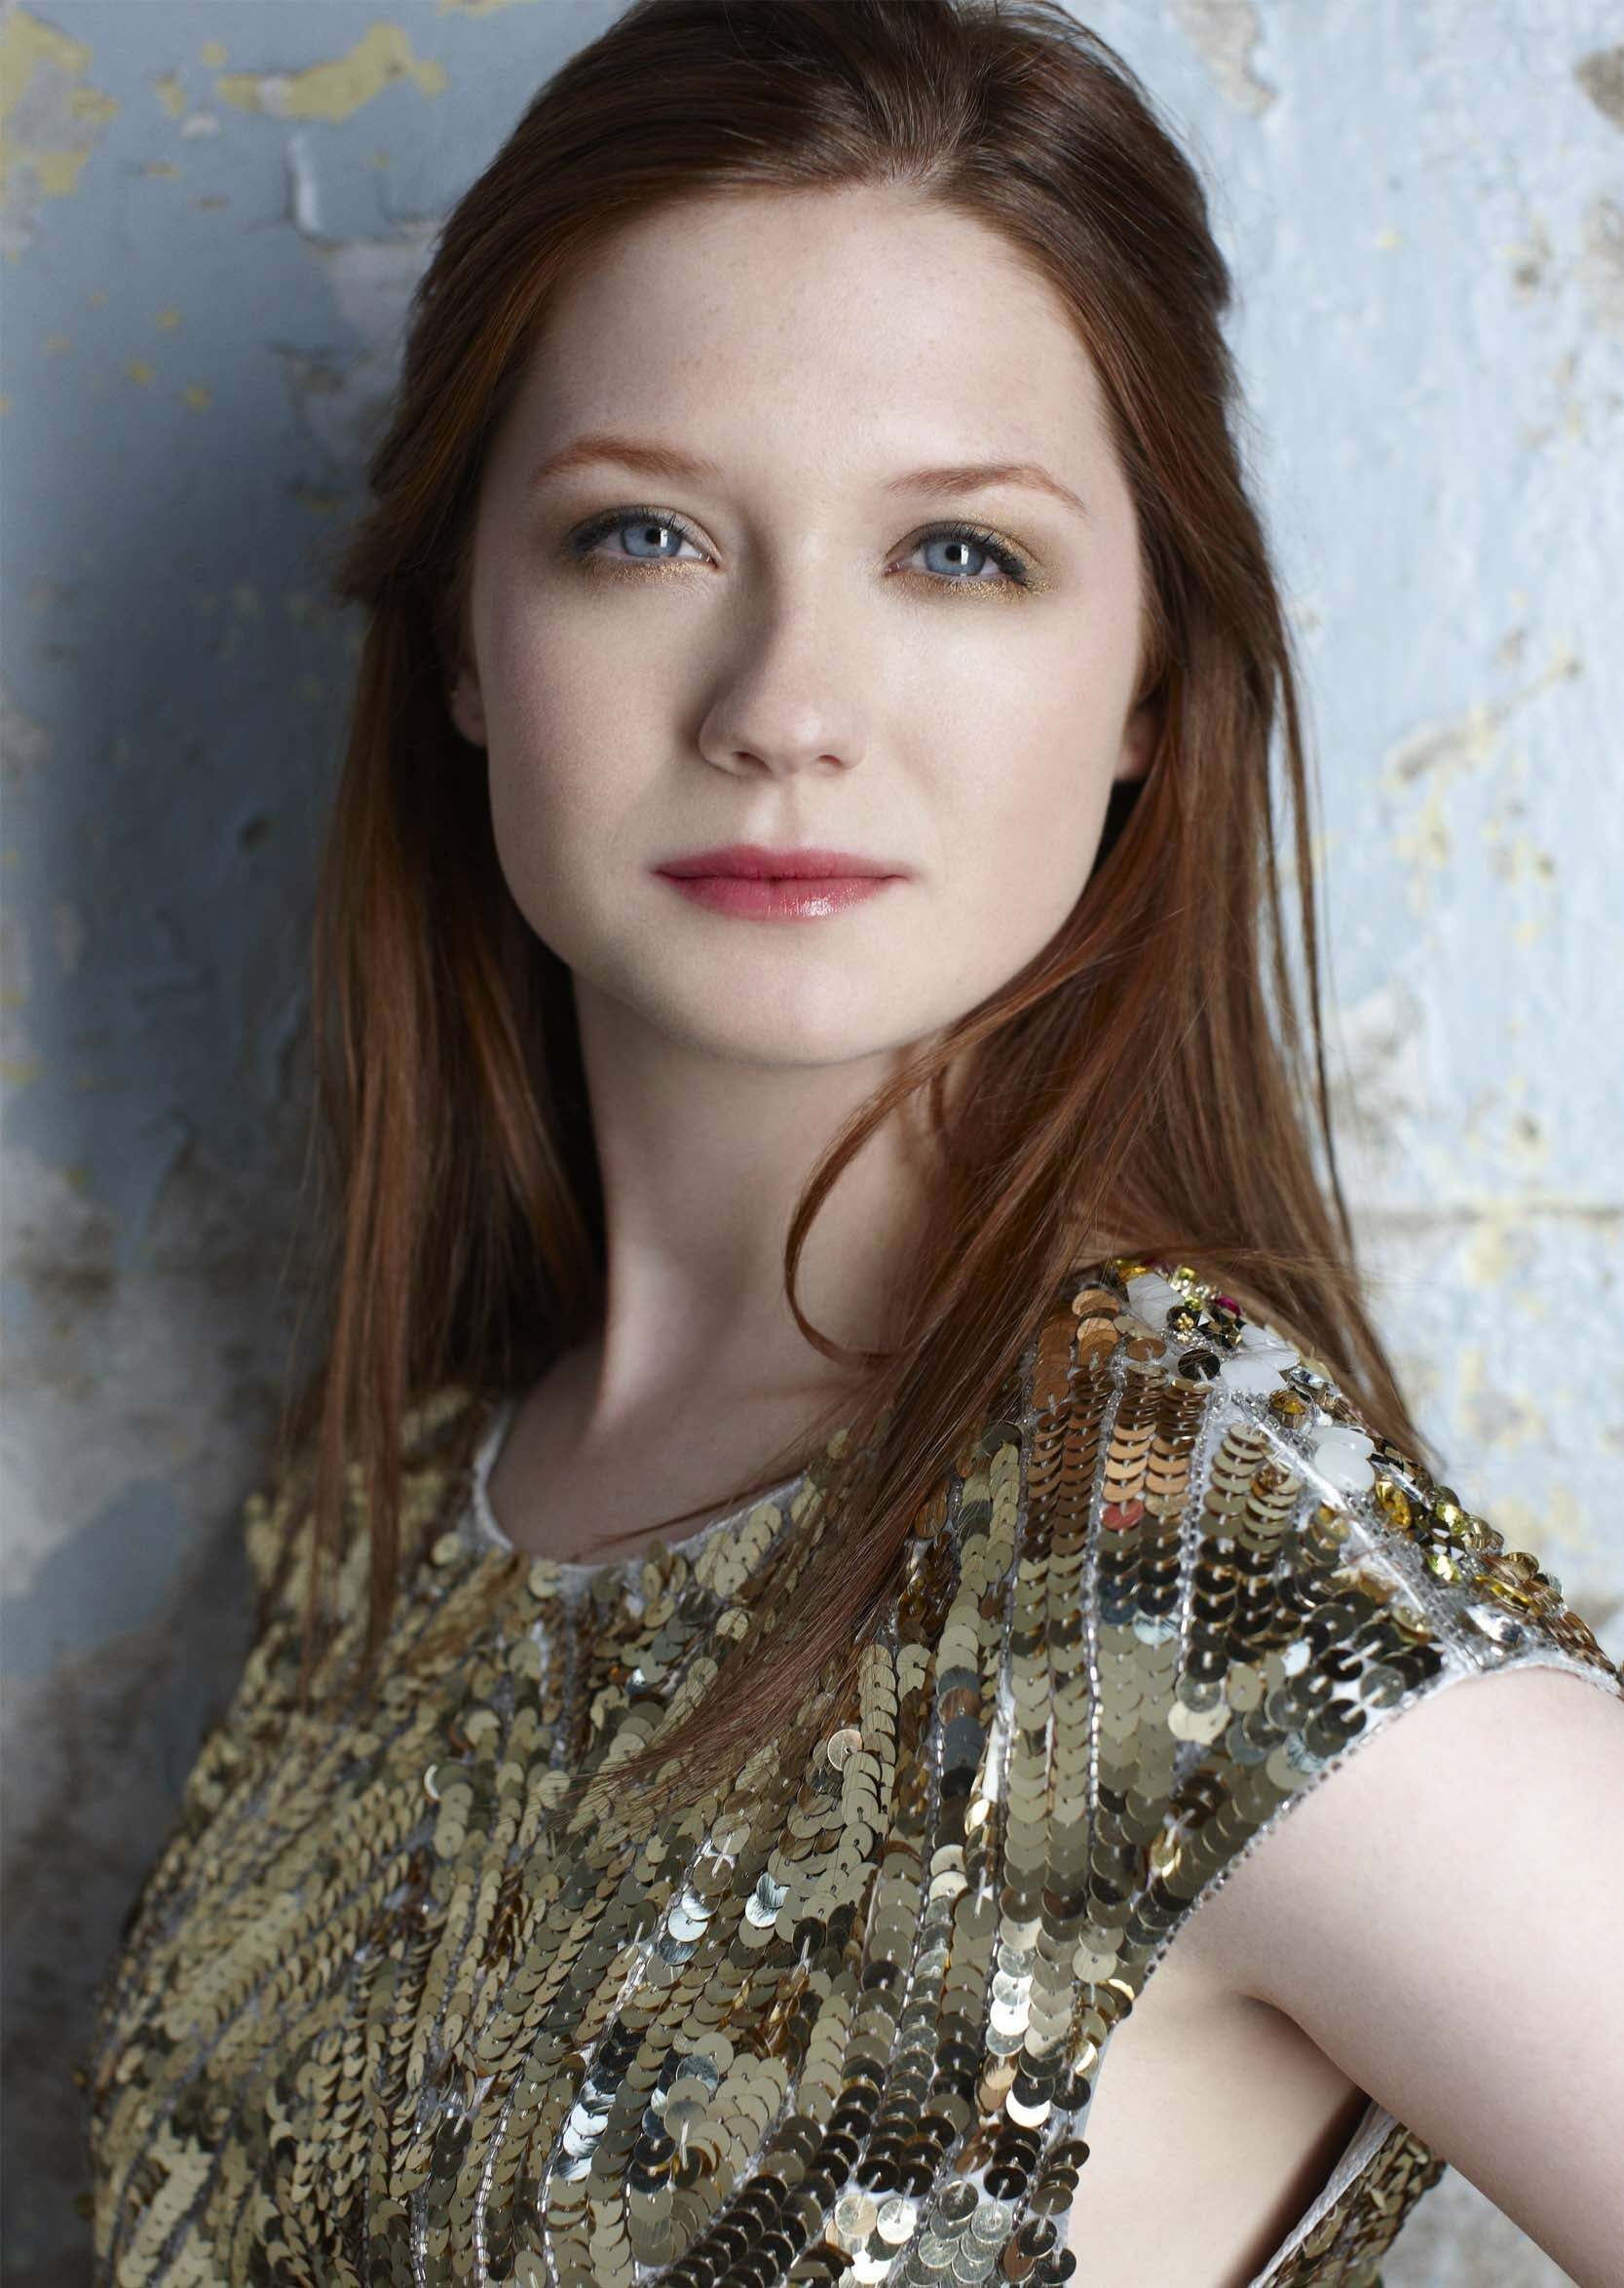 Bonnie Wright is making me horny